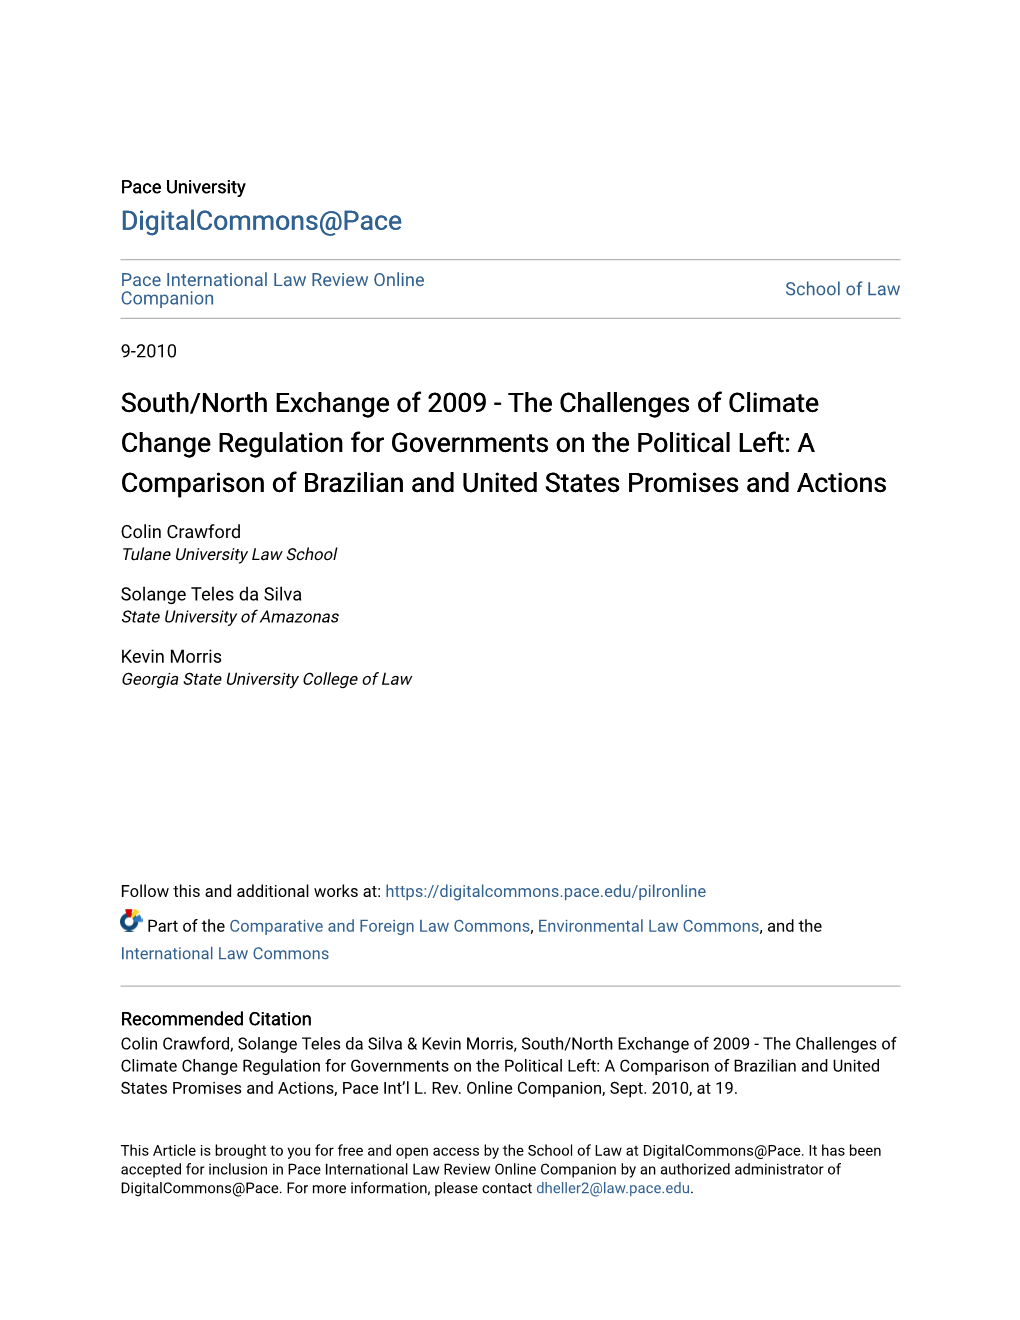 The Challenges of Climate Change Regulation for Governments on the Political Left: a Comparison of Brazilian and United States Promises and Actions